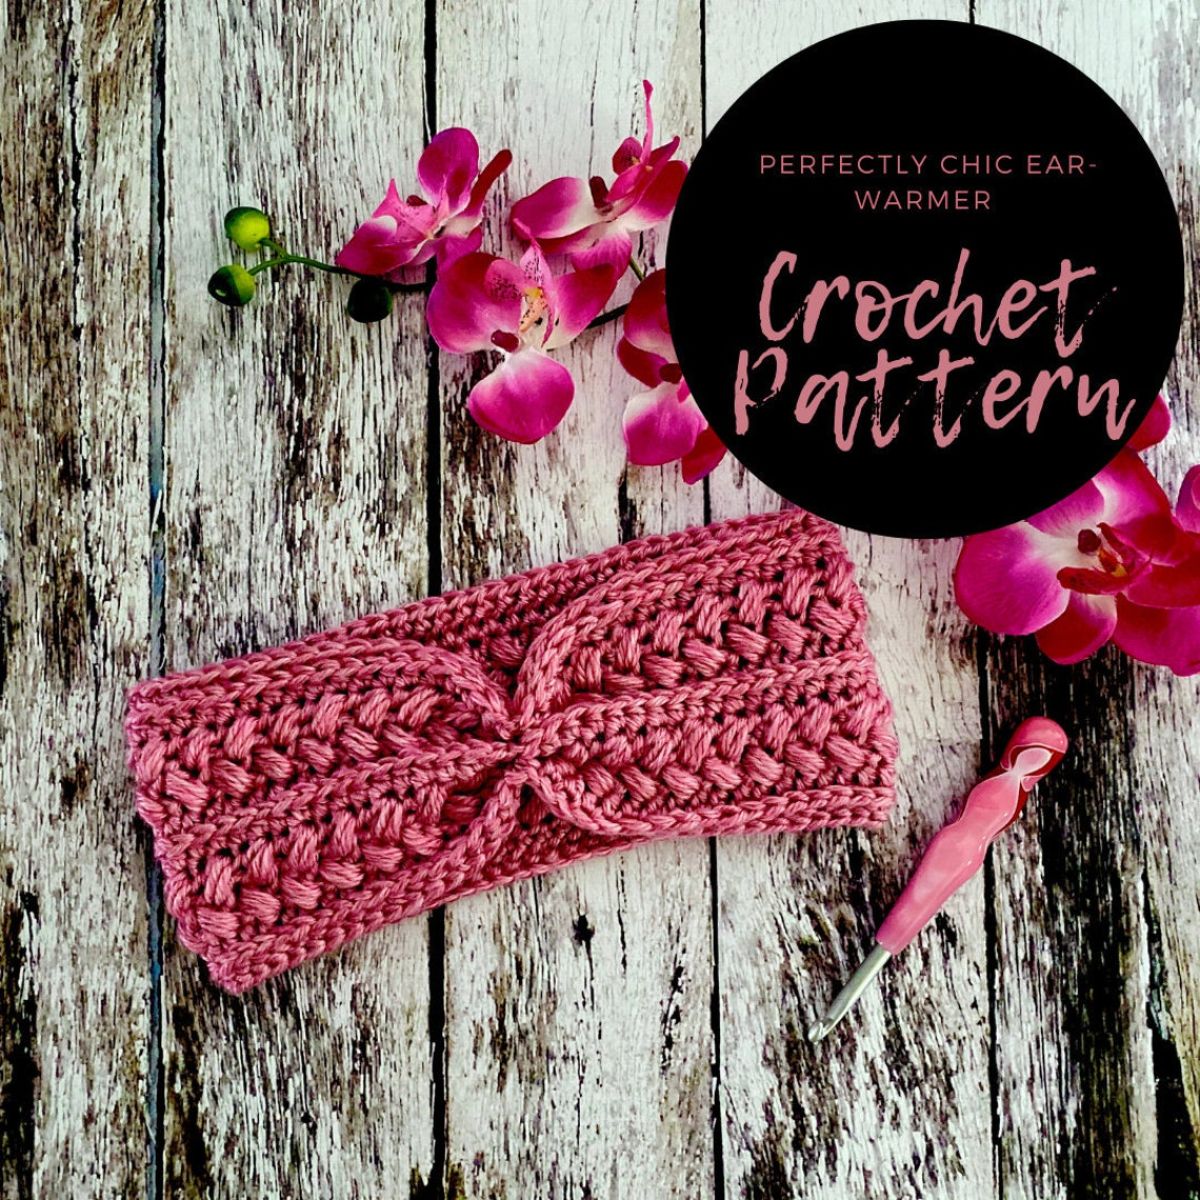 Pink crochet ear warmer with small bobble design that meets in the middle on a wooden background with a pink crochet hook and orchid next to it.